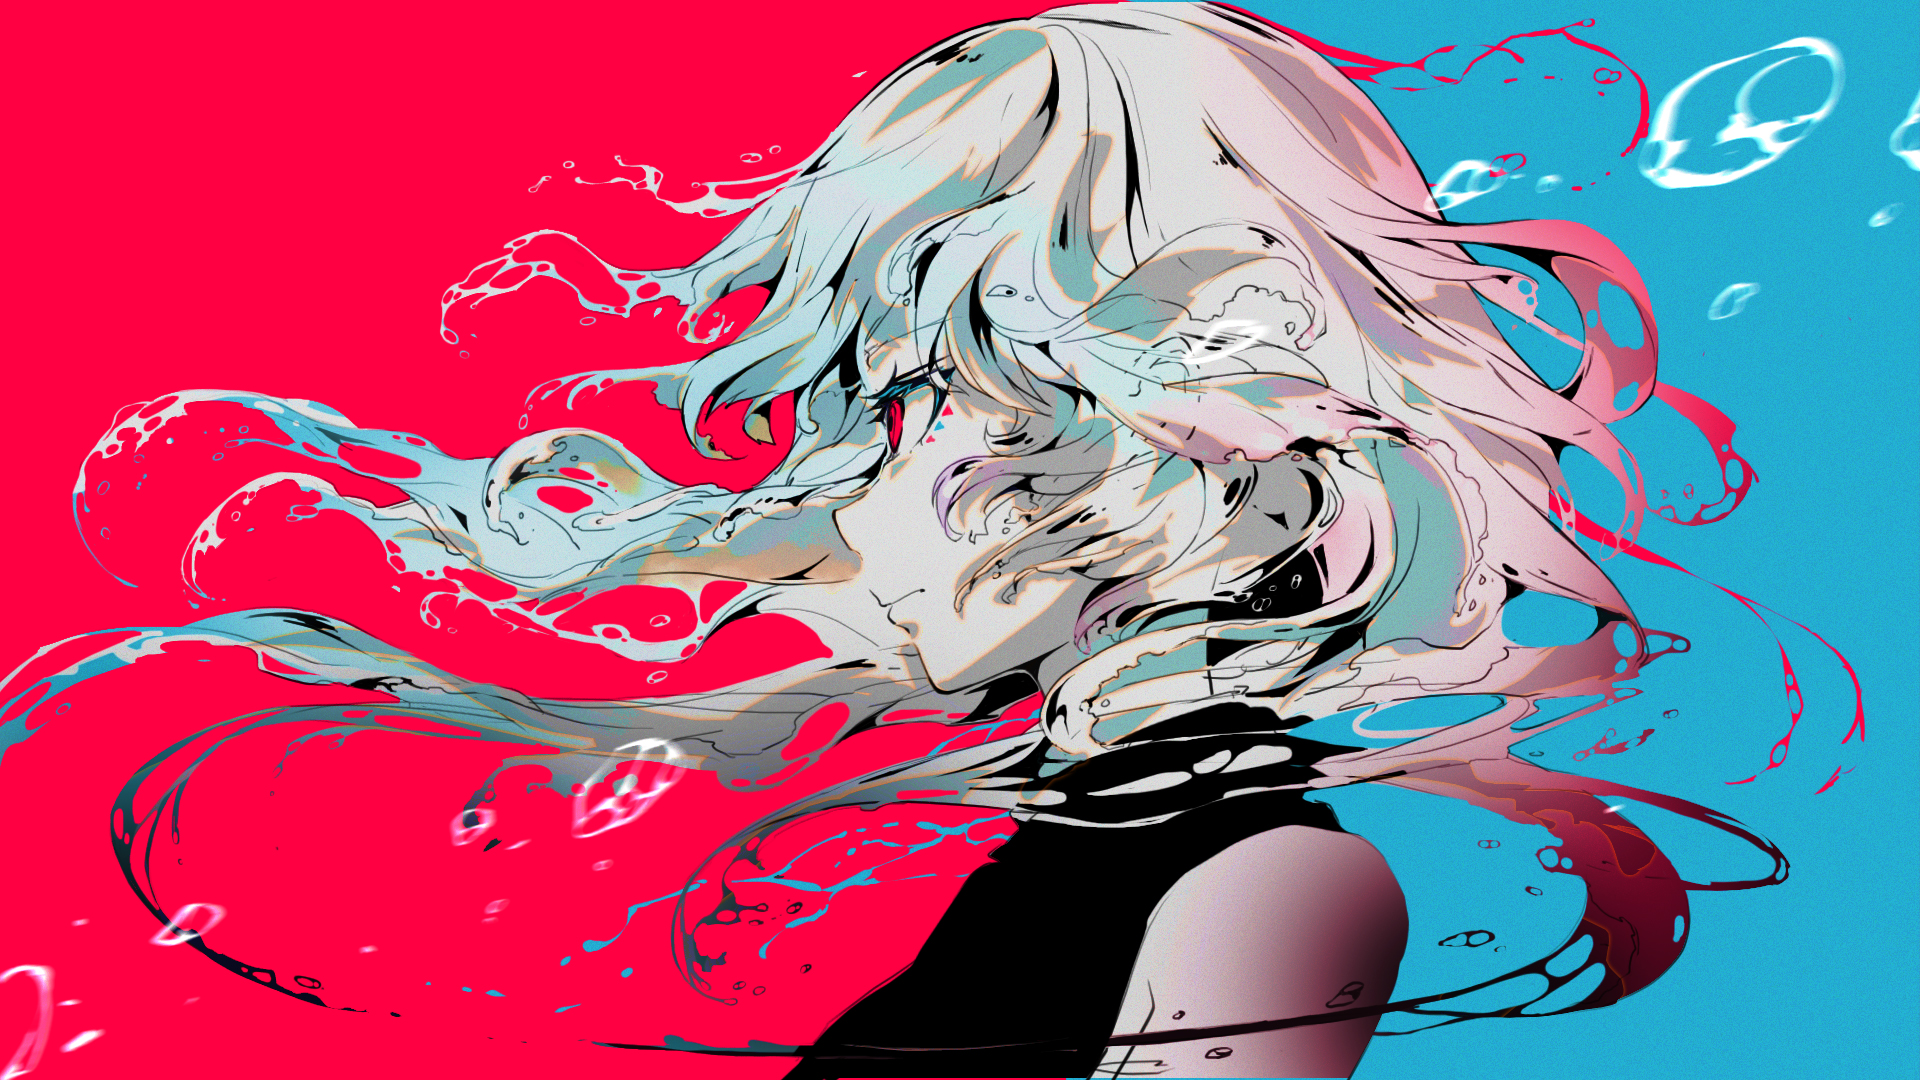 Free download 420565 original characters white hair red anime pale artwork [1920x1080] for your Desktop, Mobile & Tablet. Explore Red and Blue Anime Wallpaper. Blue and Red Wallpaper, Red